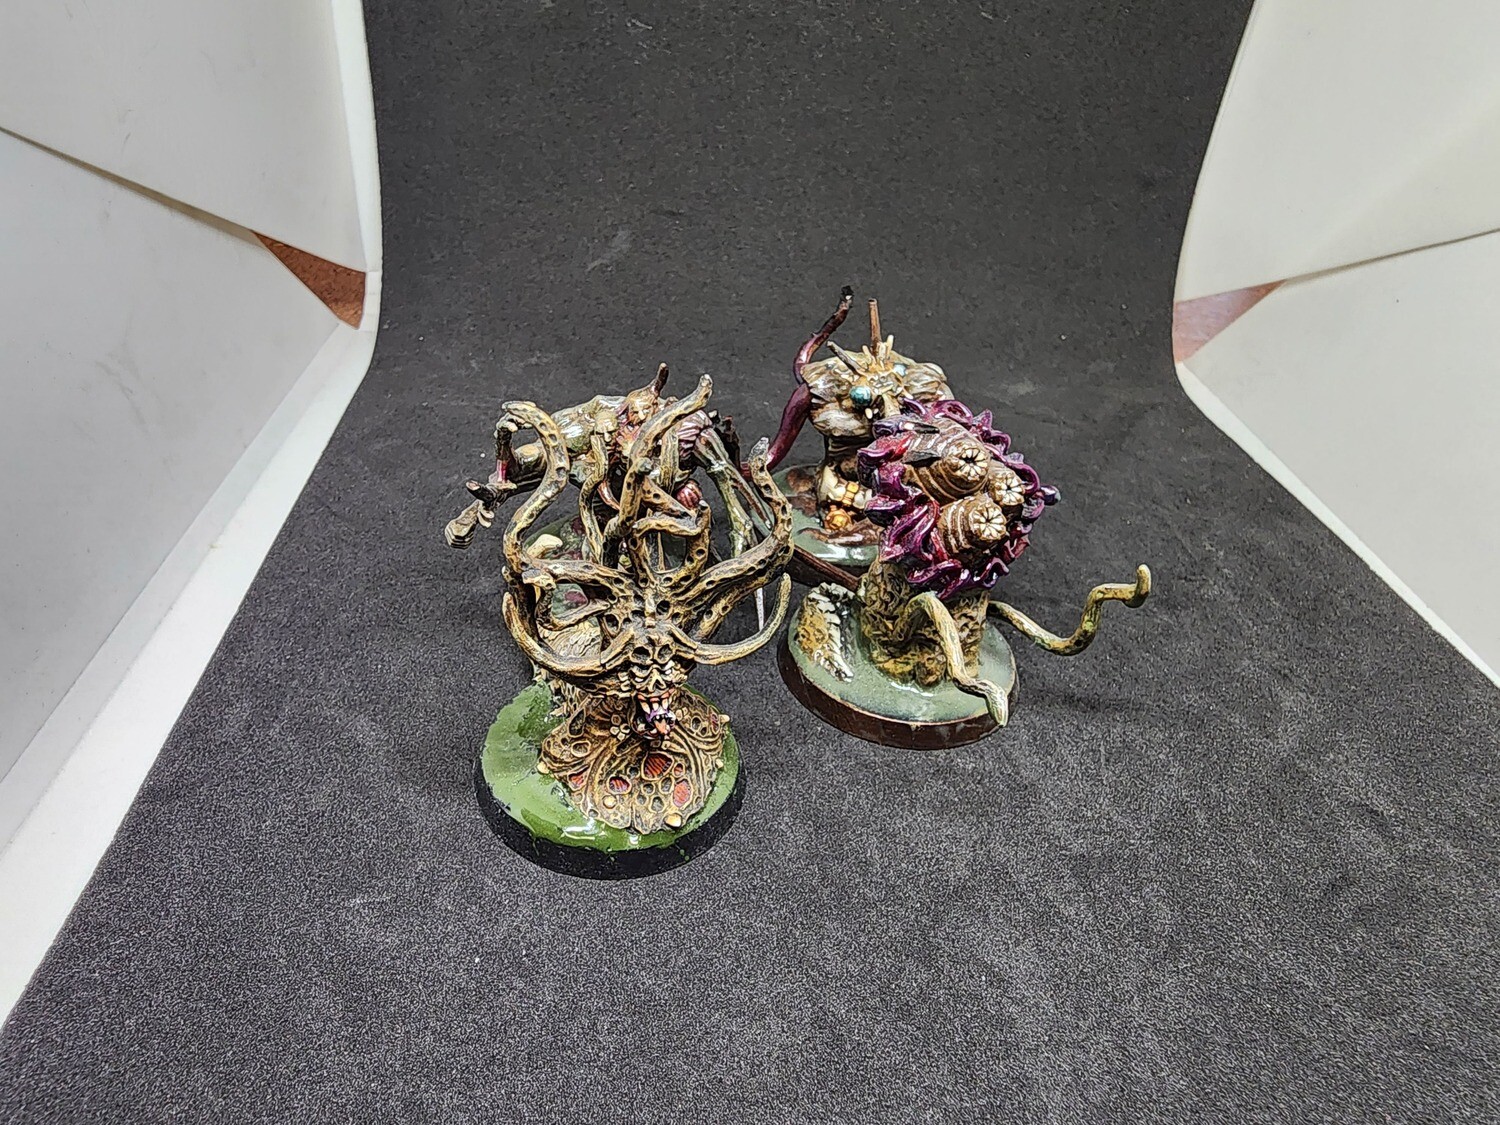 Used Warhammer Chaos Spawn (some OOP, some conversions)